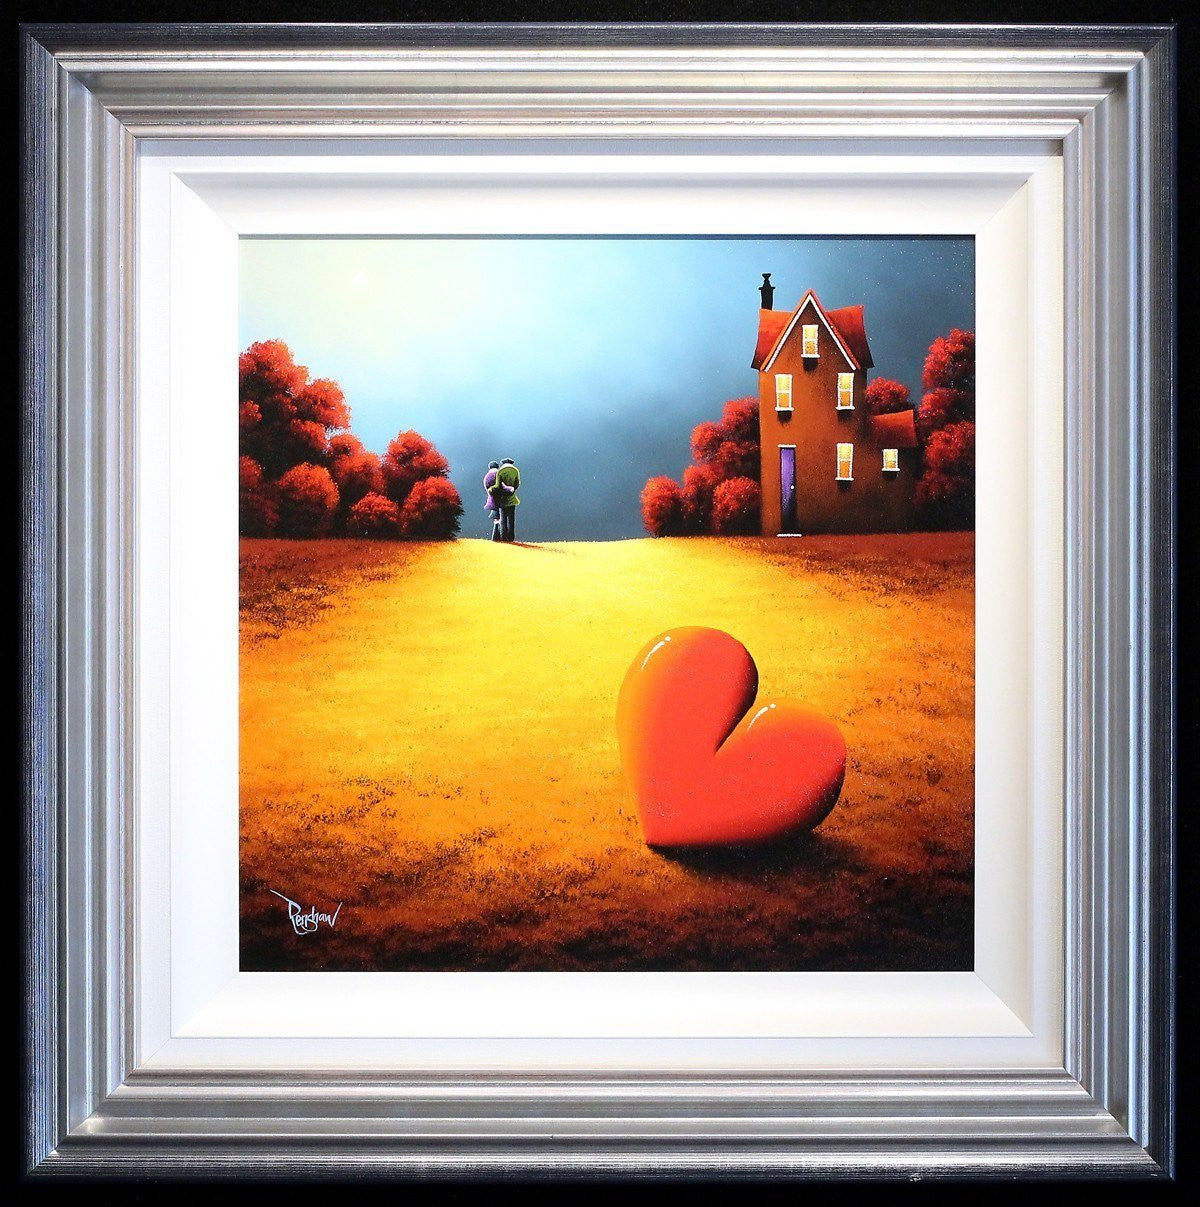 I'll Be Right Beside You - SOLD David Renshaw